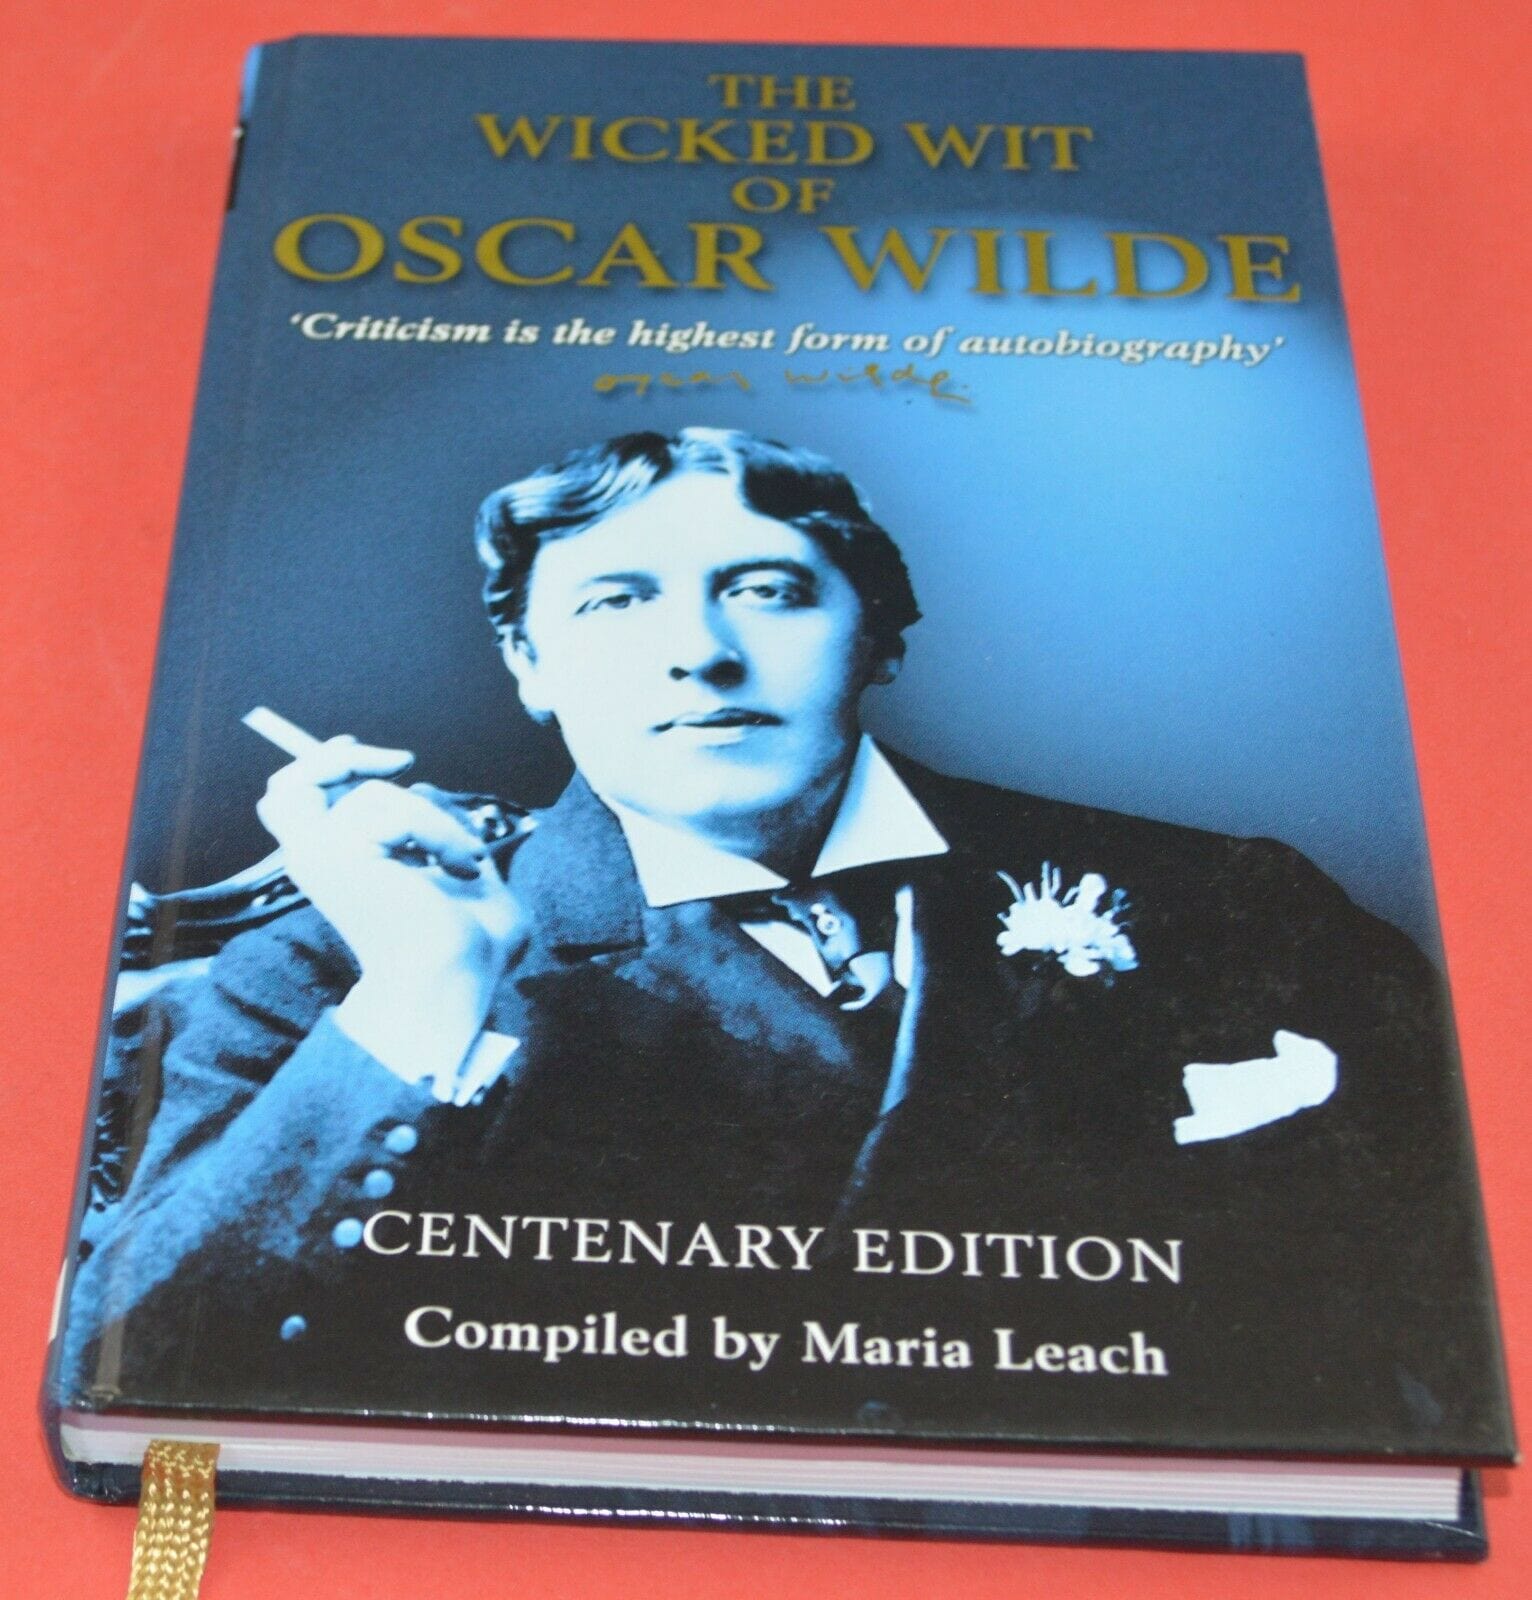 SECONDHAND BOOK THE WICKED WIT OF OSCAR WILDE CENTENARY EDITION(PREVIOUSLY OWNED)GOOD CONDITION - TMD167207